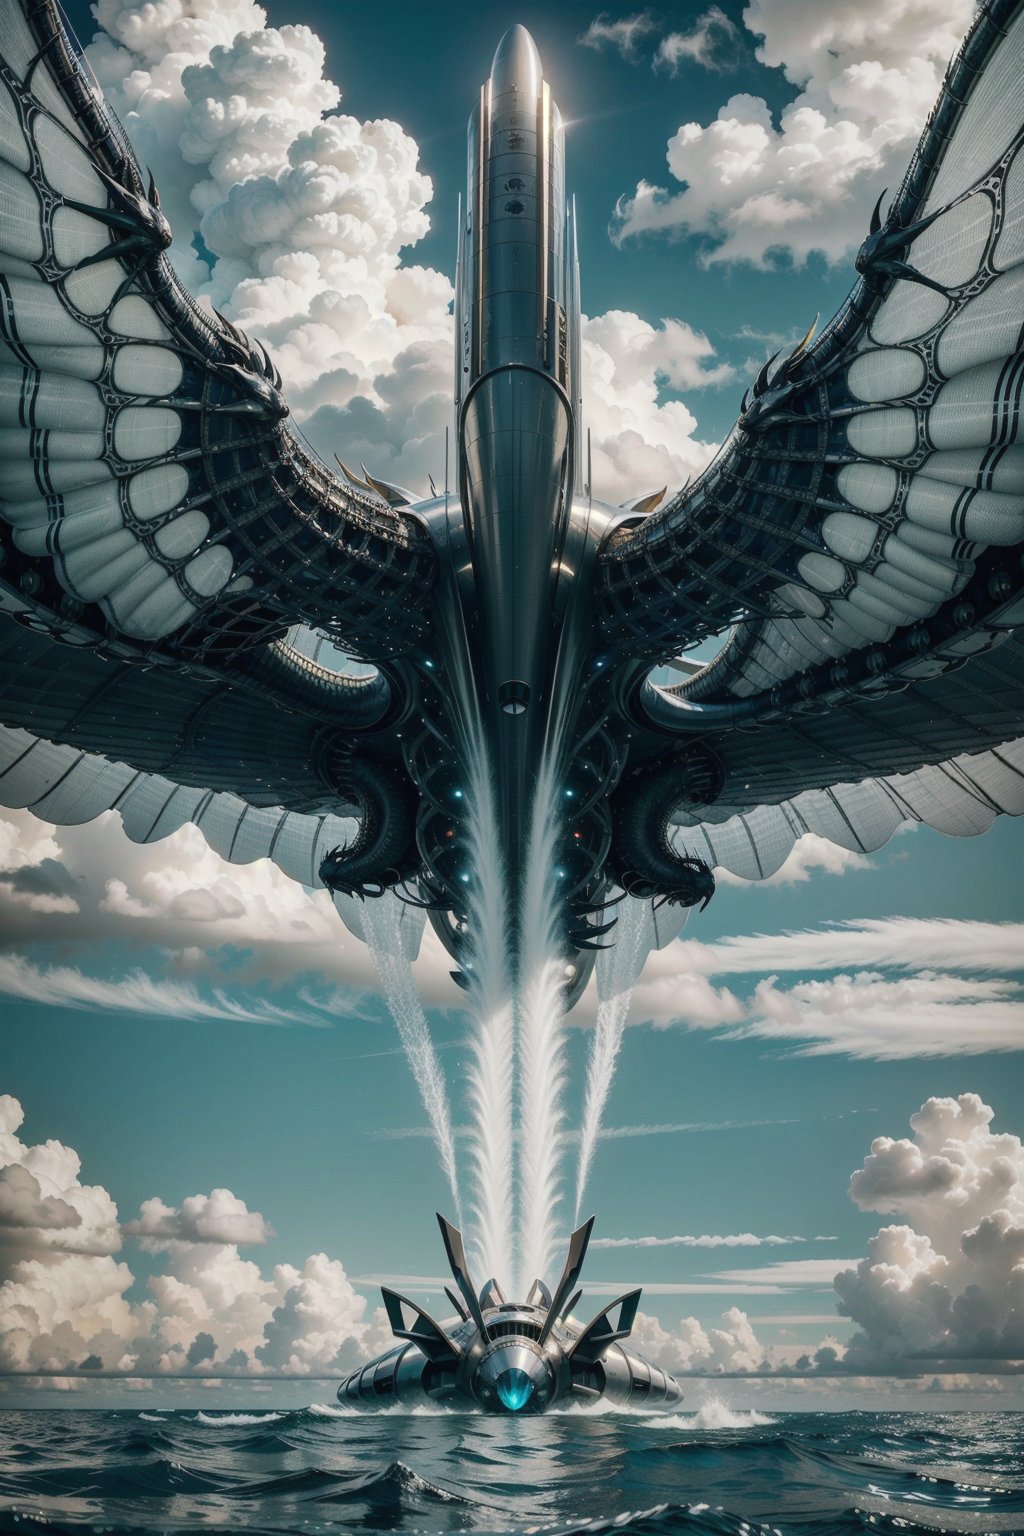 Photorealistic render in high definition of a luxury mega jet airplane on the sky, caotic scene air dragon luxury, sky, with wings on both sides and in the middle of the design, gold, white, black, turquoise, surreal concept on a private beach, very sculptural and with fluid and organic shapes, with symmetrical curves in shape of dragon wings inspired by Zaha Hadid's style, gold, with black and white details. building inside the jet and a rocket, The design is inspired by the main stage of Tomorrowland 2022, with ultra-realistic Art Deco details and a high level of image complexity.